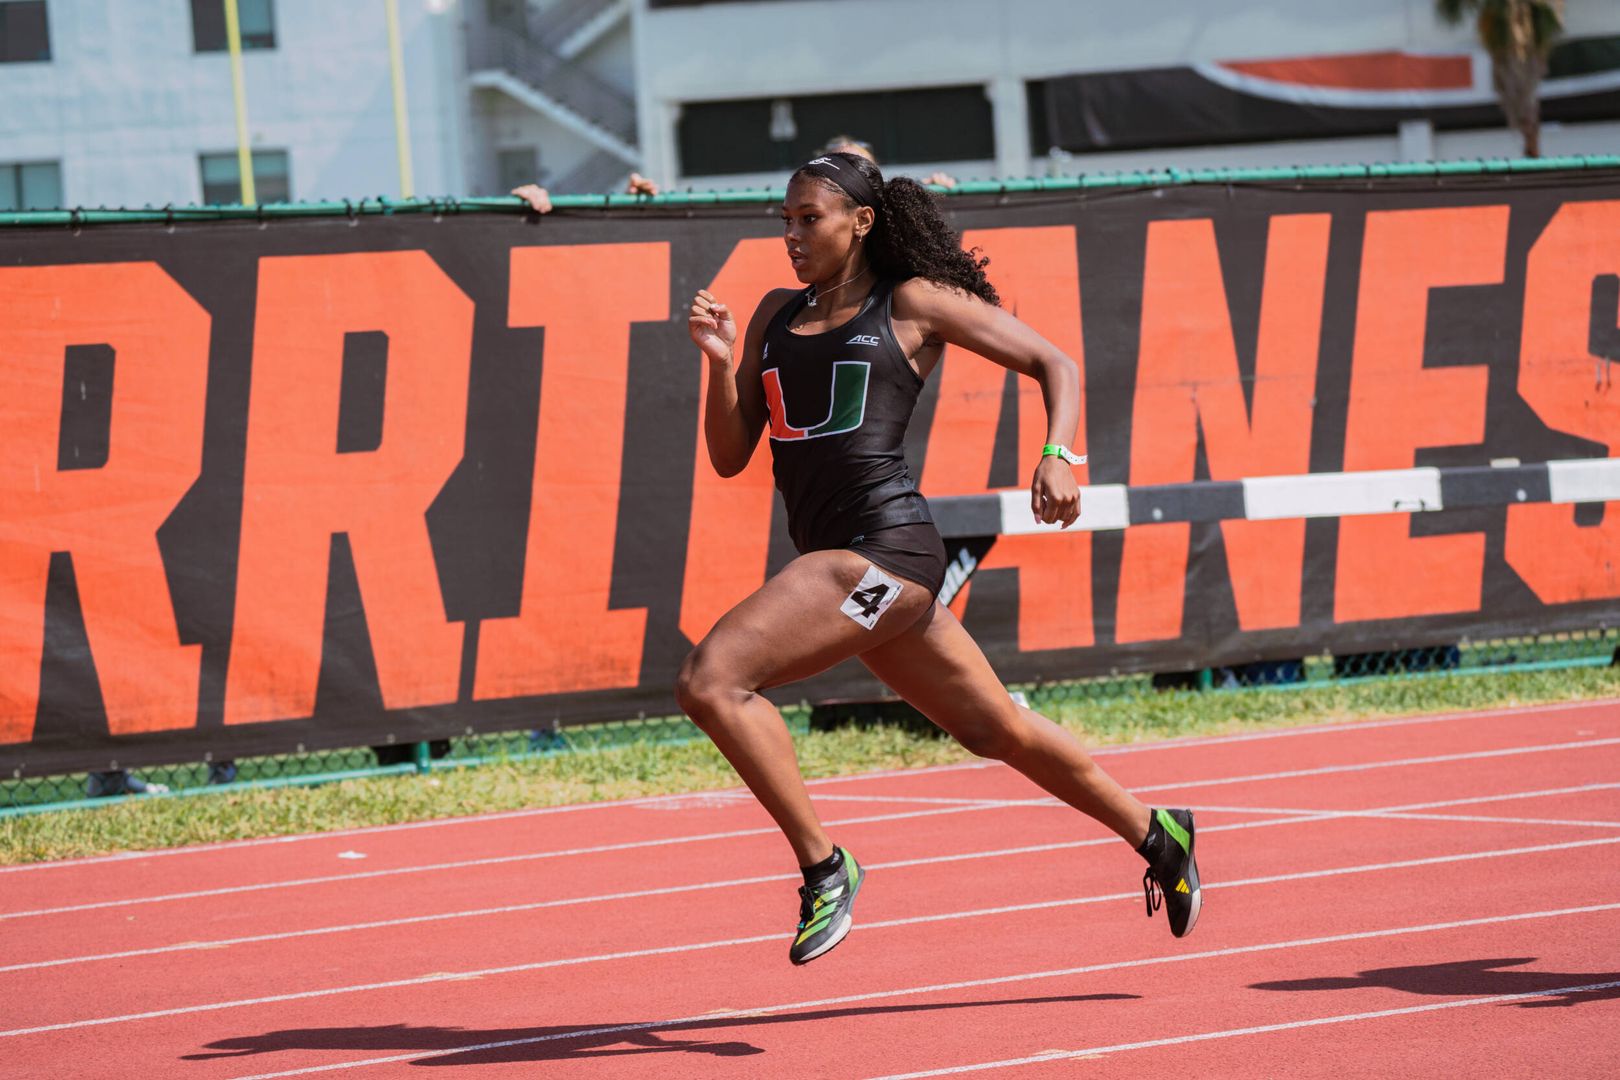 Hebron Tops the Nation in the Women’s 400M Hurdles, Hurricanes Gather New Personal Bests and Program Records